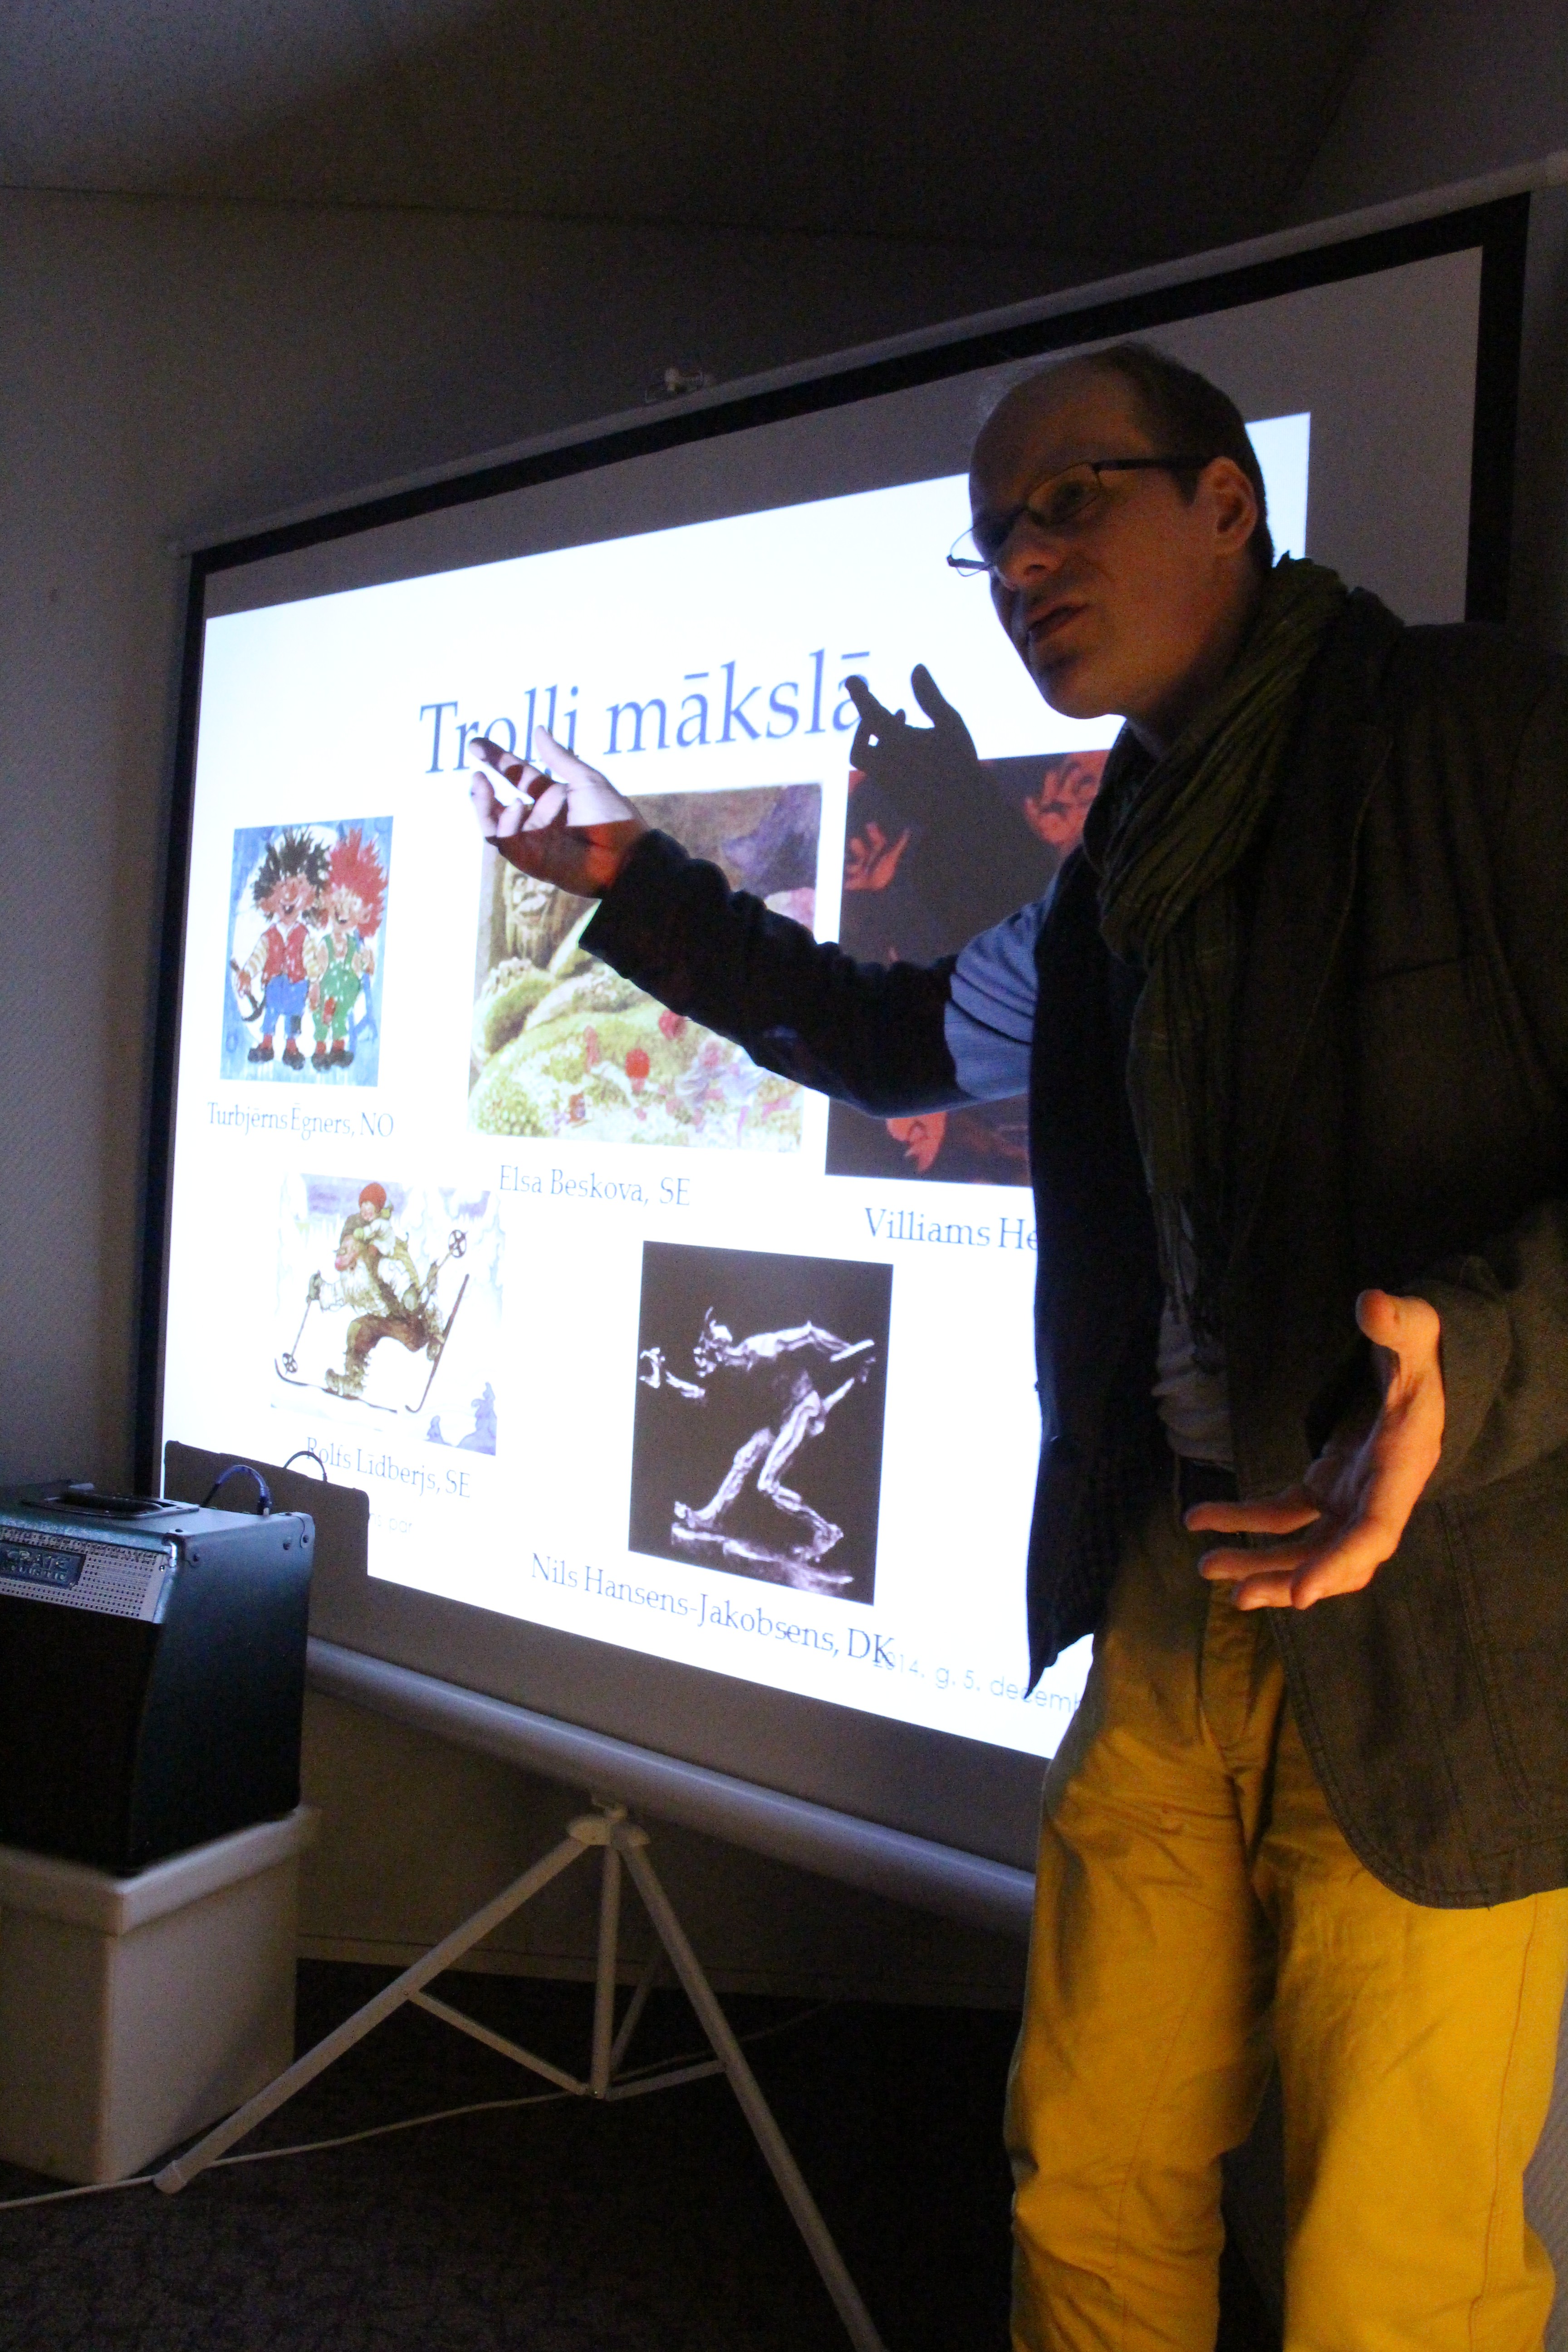 Snorre lecturing on trolls